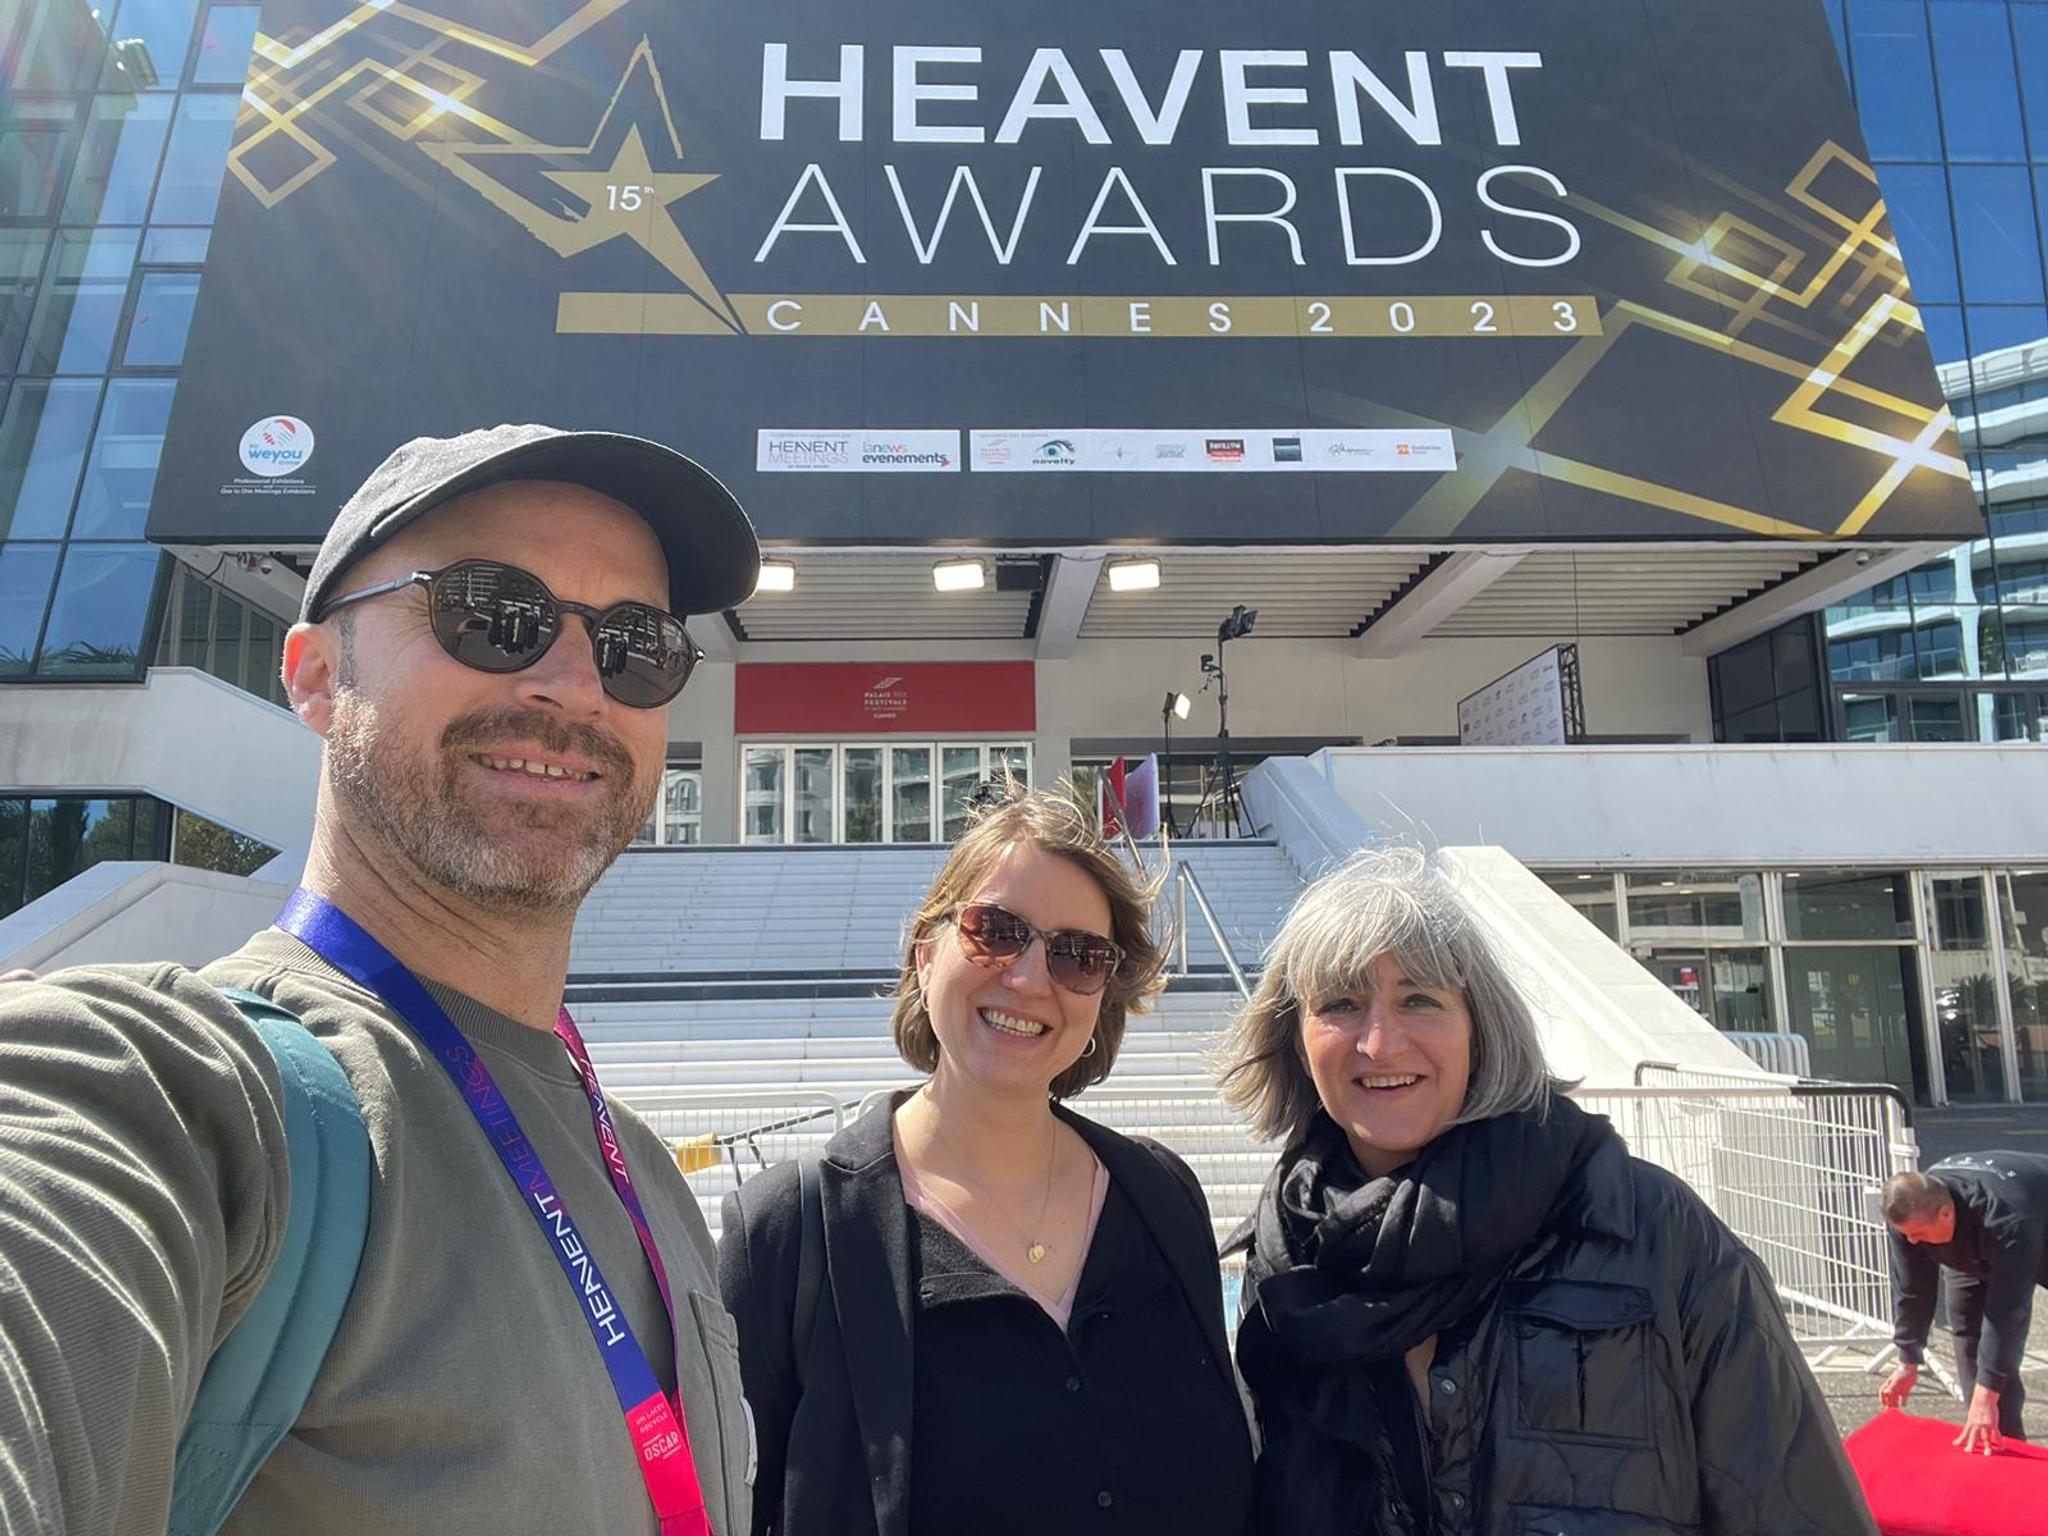 Three Battle Royal Studios Team members in front of the Heavent Awards entry